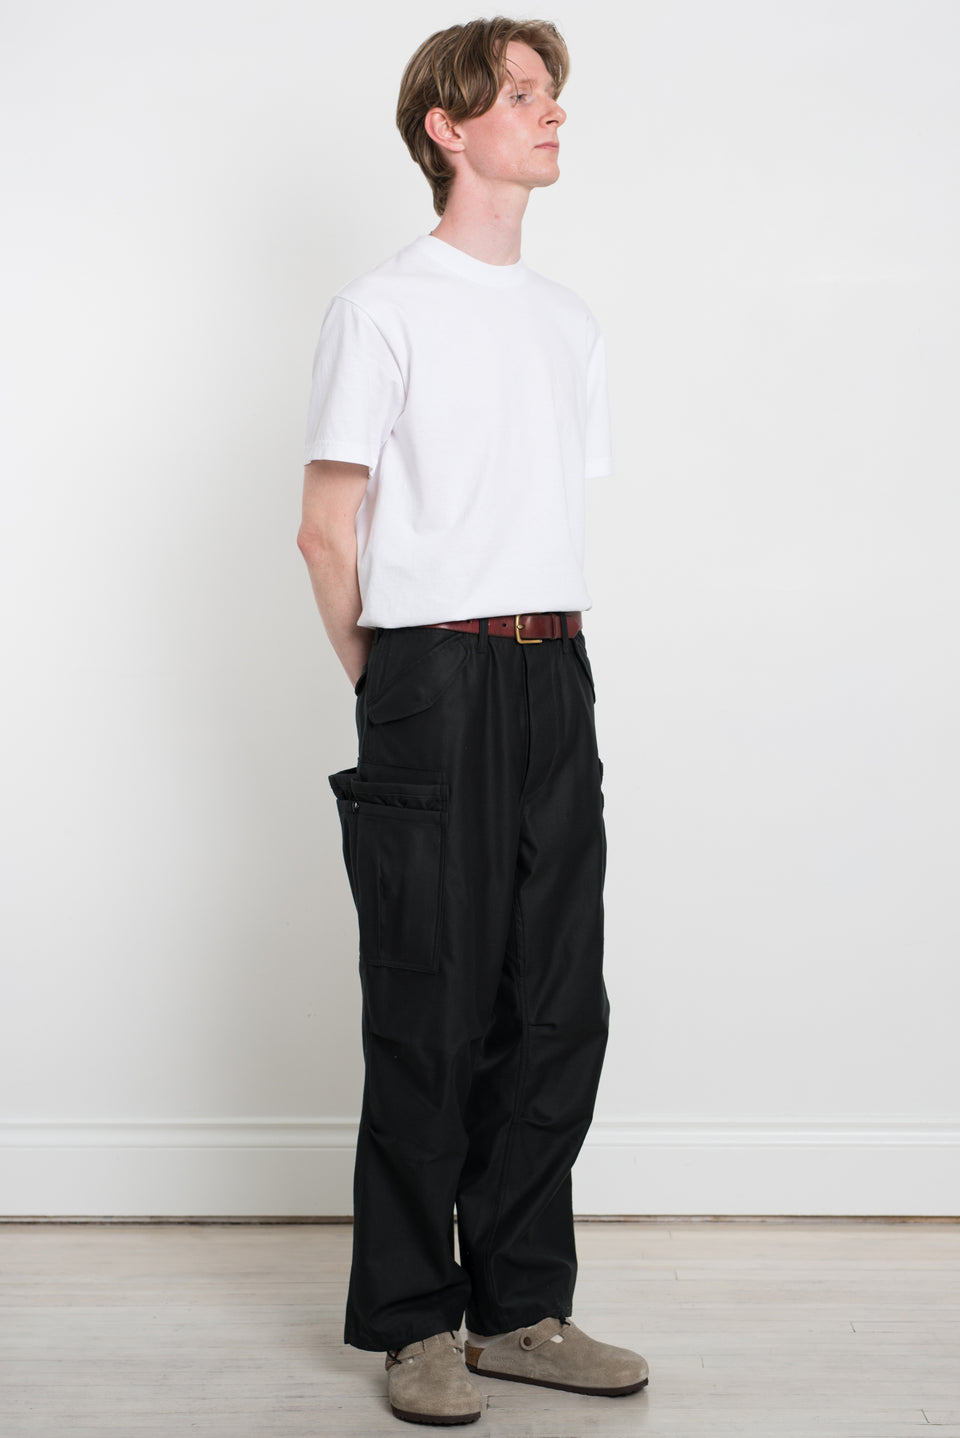 Sassafras SS23 Made in Japan SF-232009 Overgrown Pants Back Satin Black Calculus Victoria BC Canada